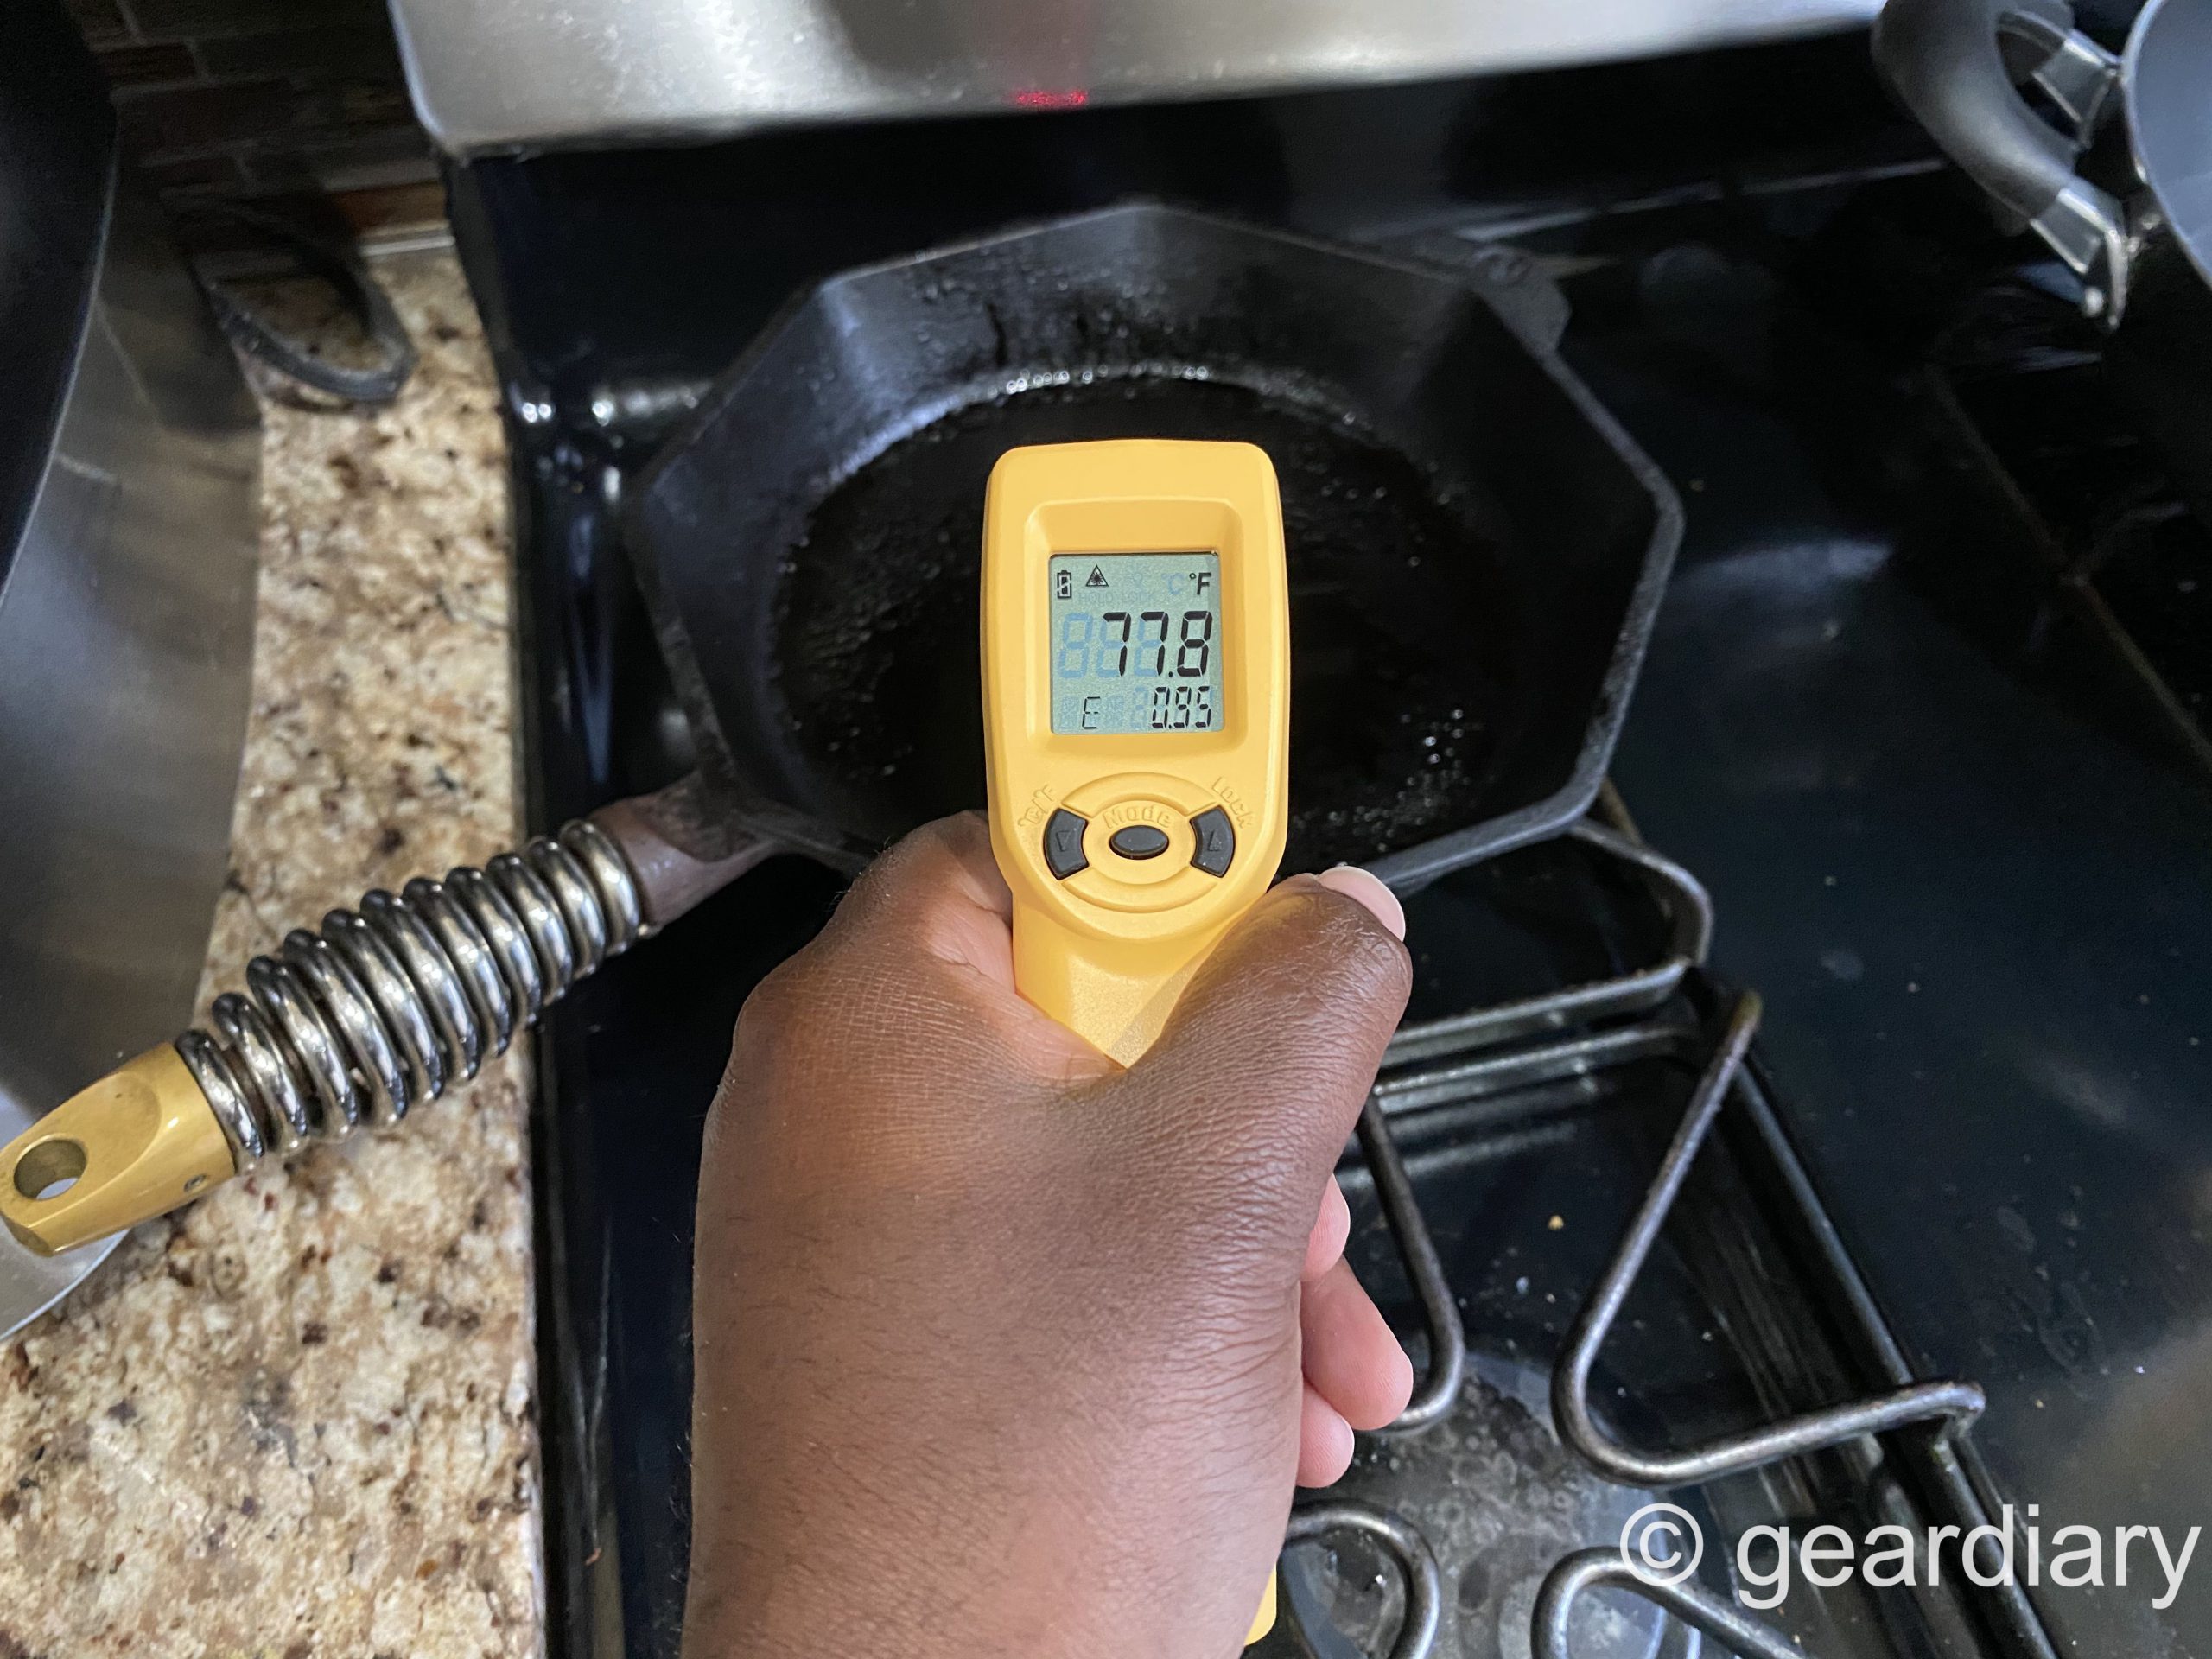 Thermoworks ThermoPop Meat Thermometer Review